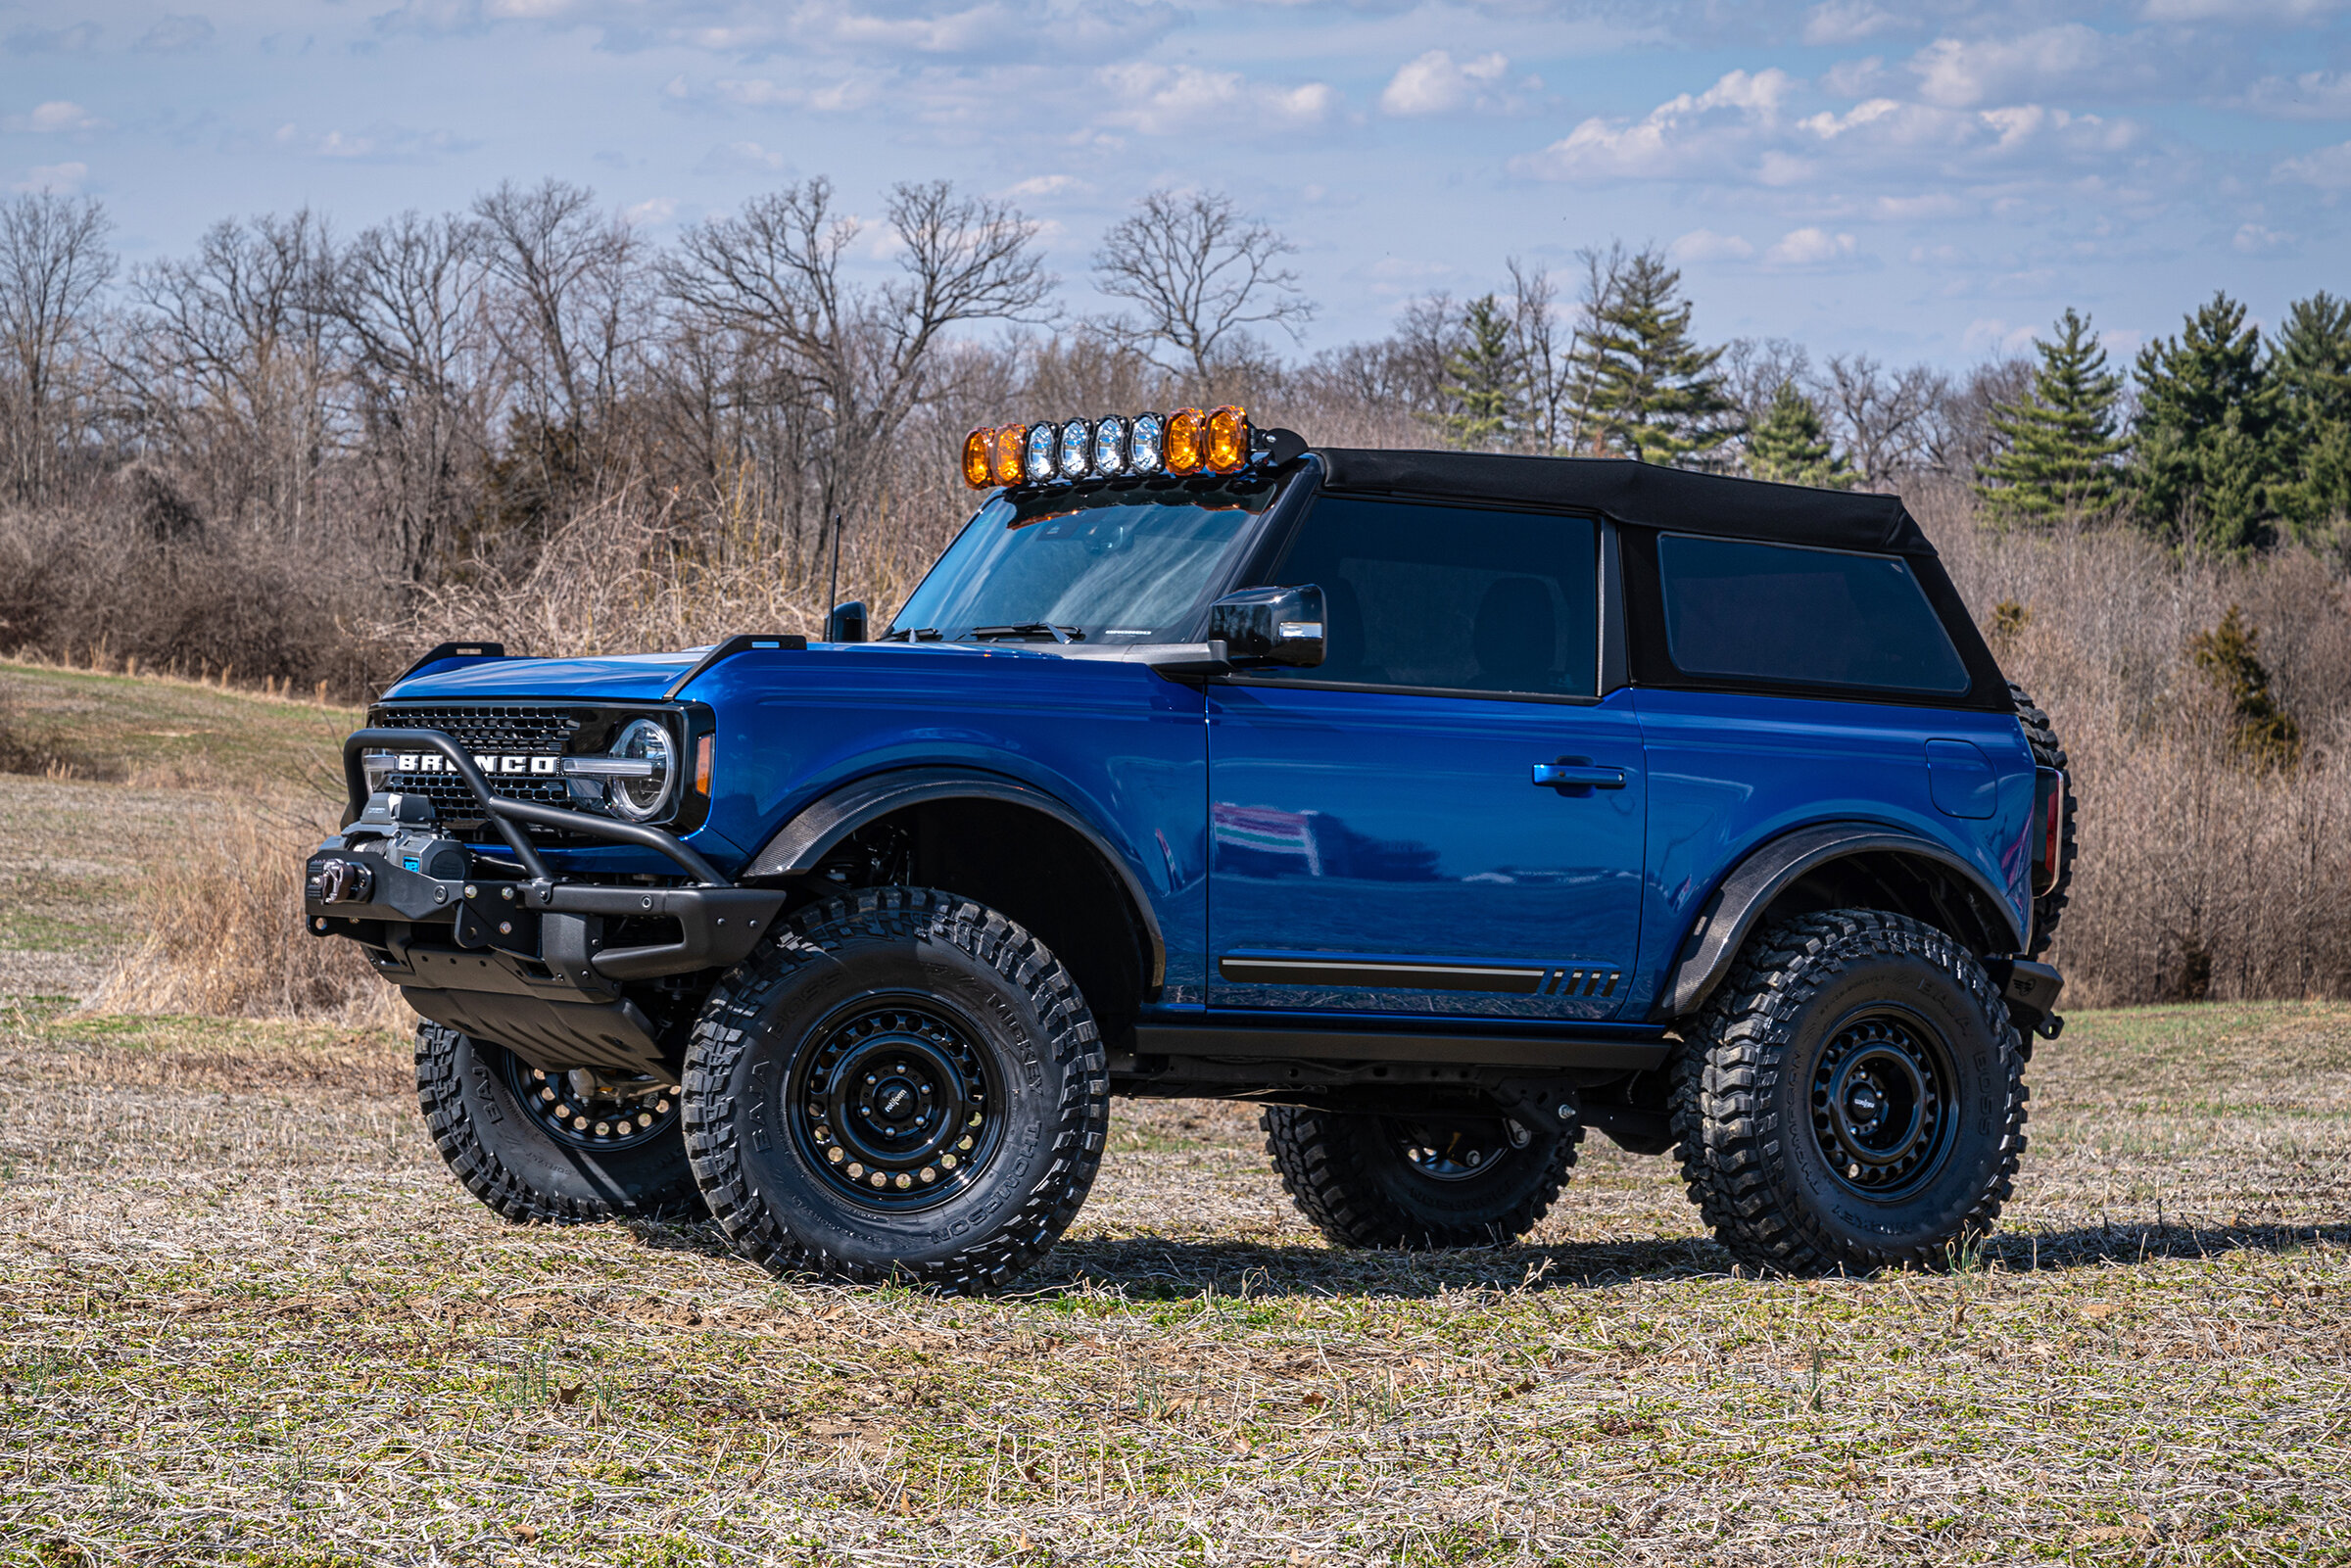 Ford Bronco Lbracket 2 door FE build (UPDATED) on Zone 3" lift and 37's 57CBE78A-0F40-4428-819F-27841D57034E